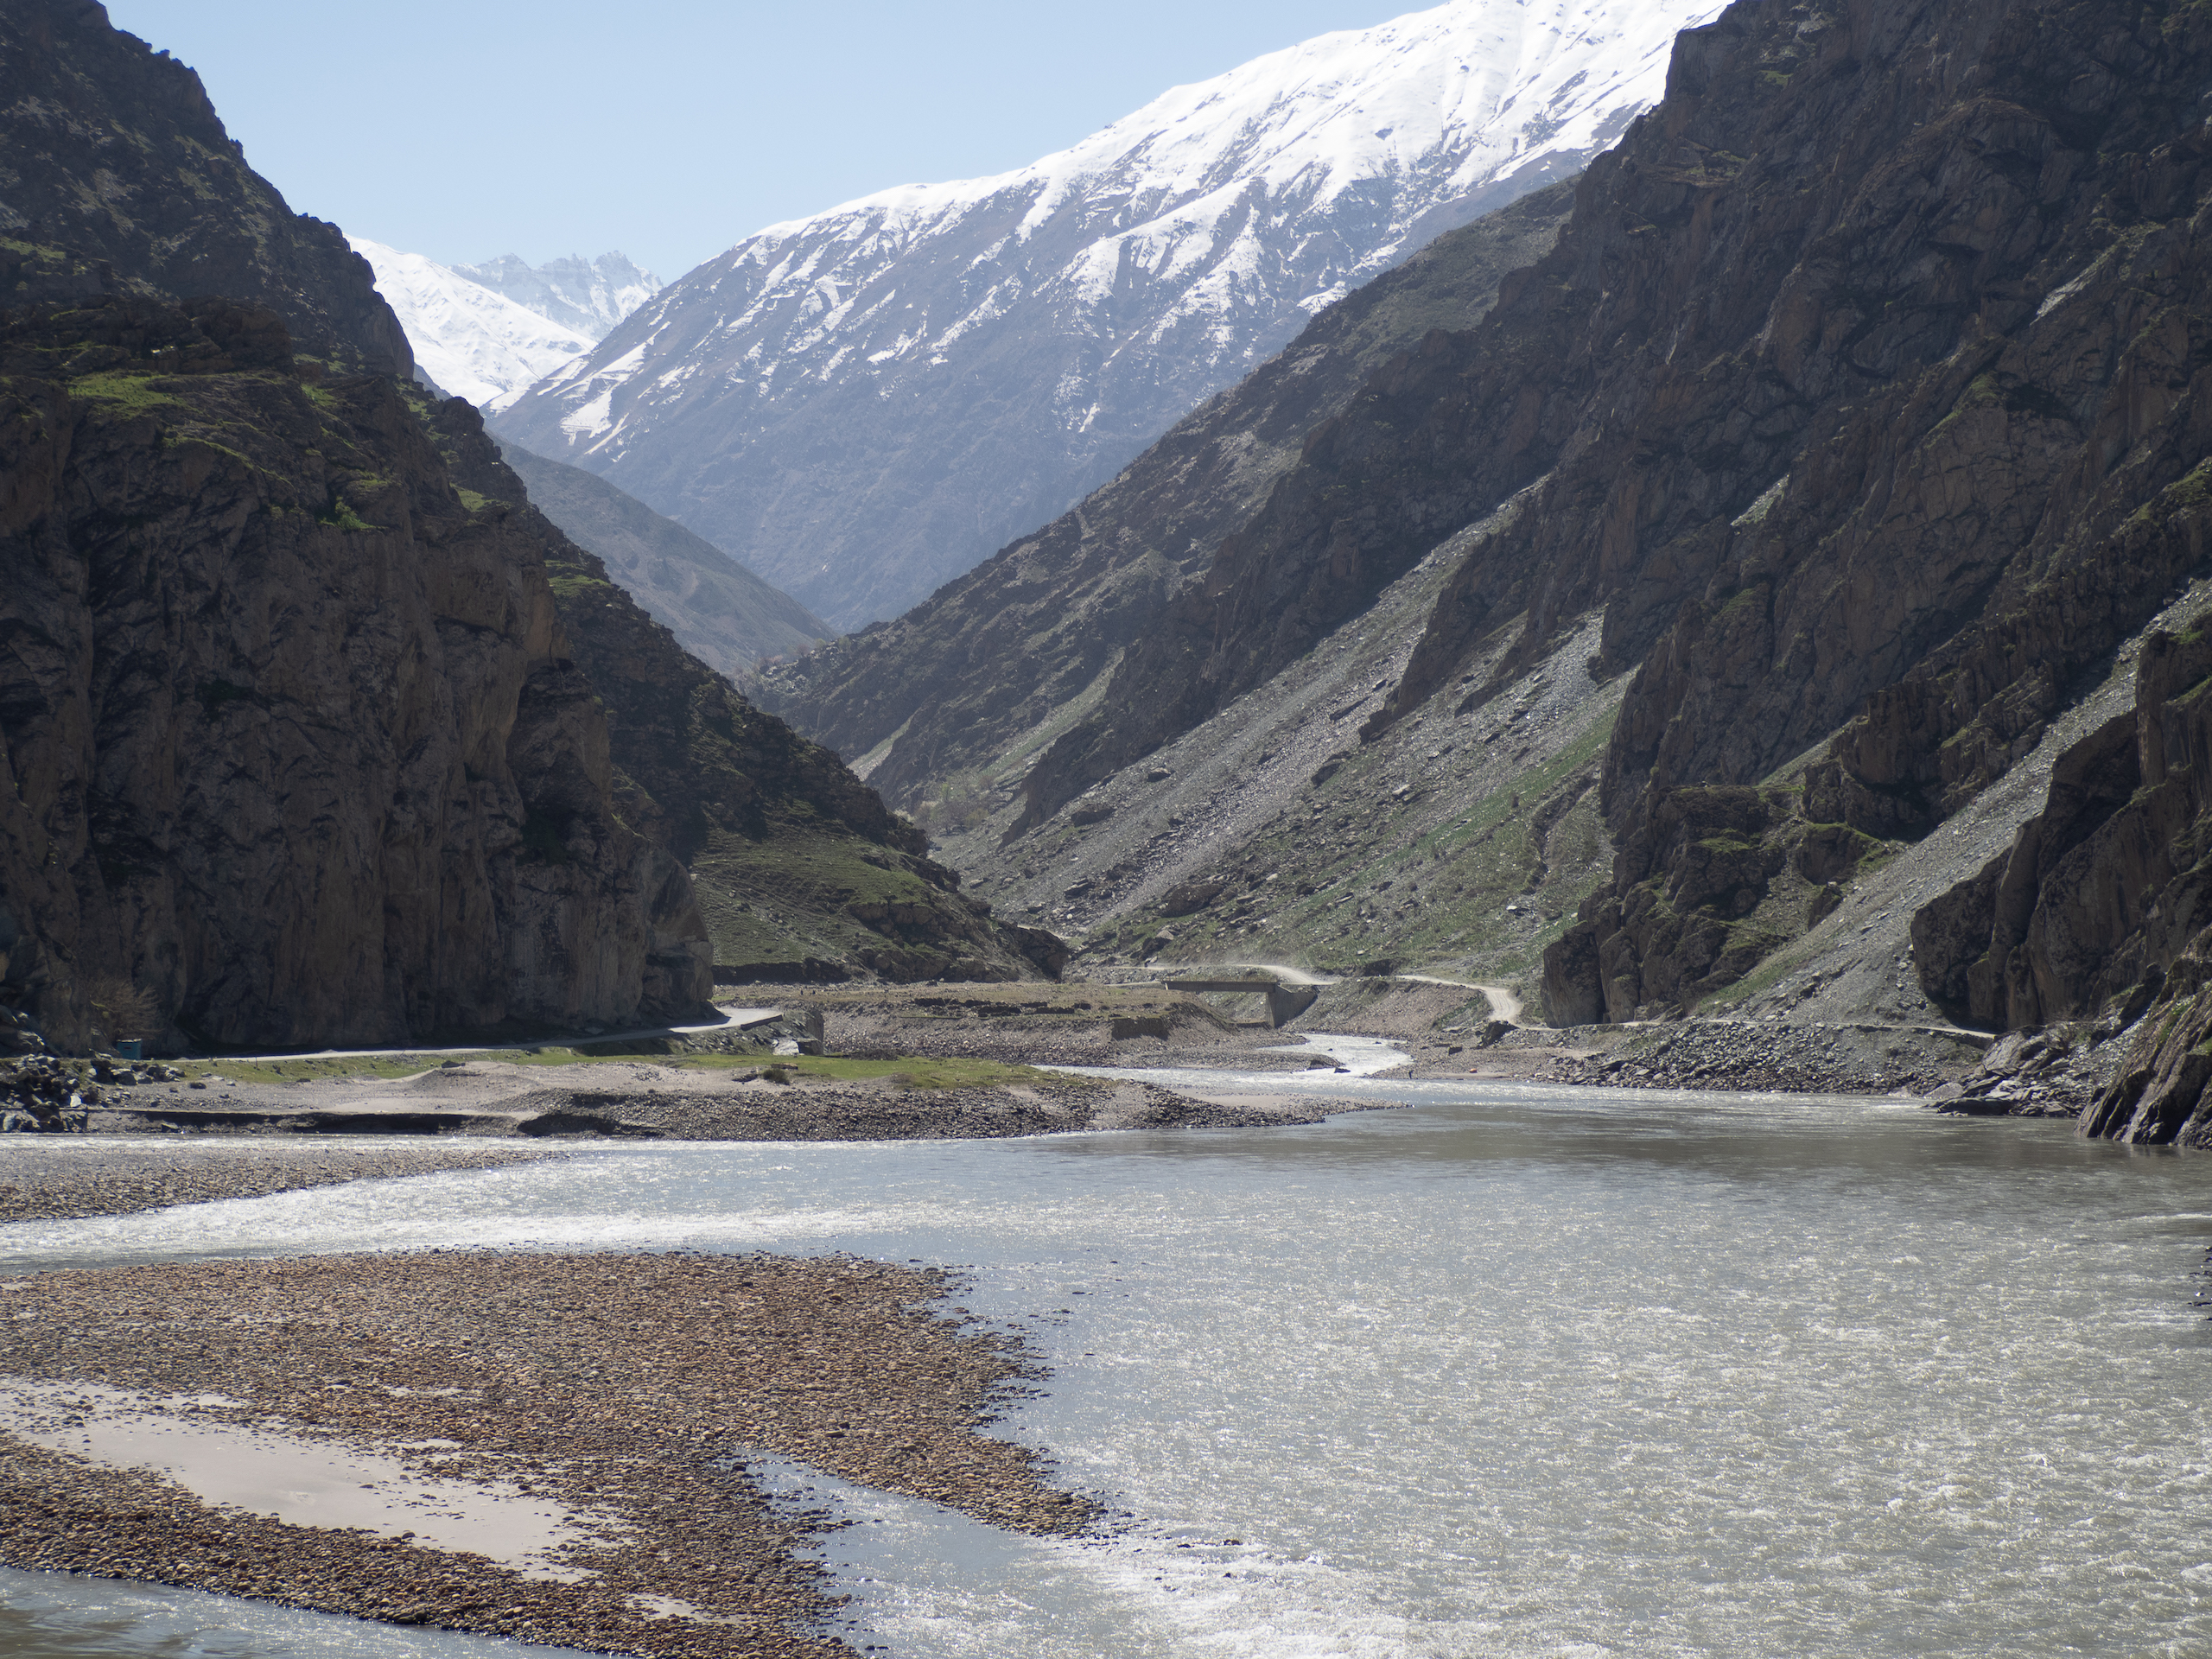 The Pamir Highway (left of image) follows the Panj River, which forms the border between Tajikistan and Afghanistan in Darvoz district 